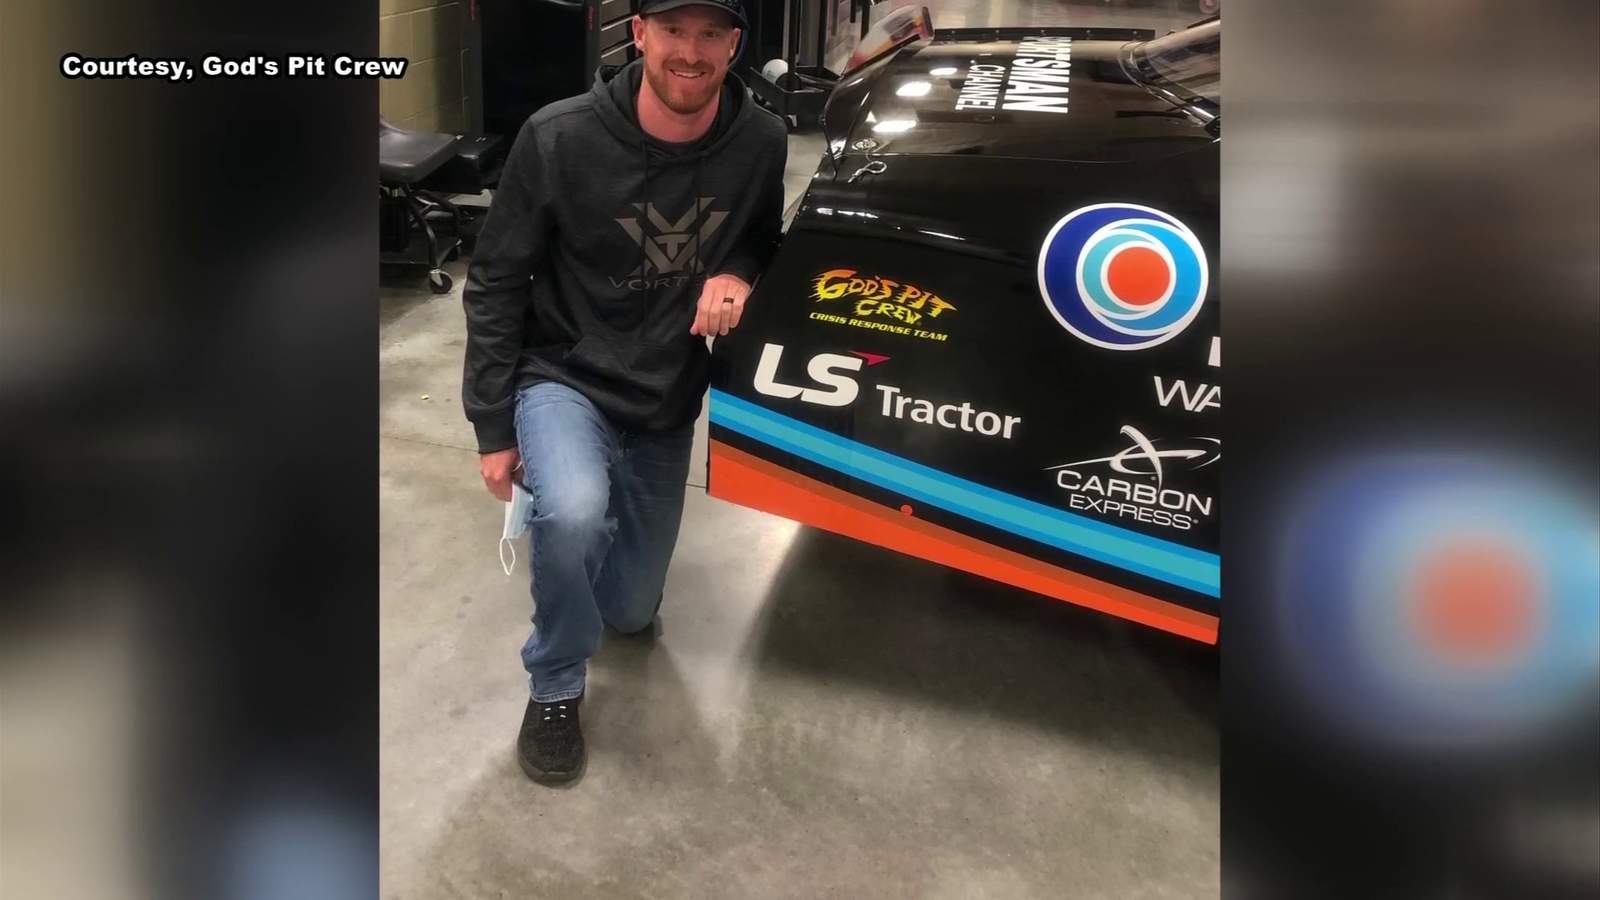 God’s Pit Crew logo featured on NASCAR driver’s car